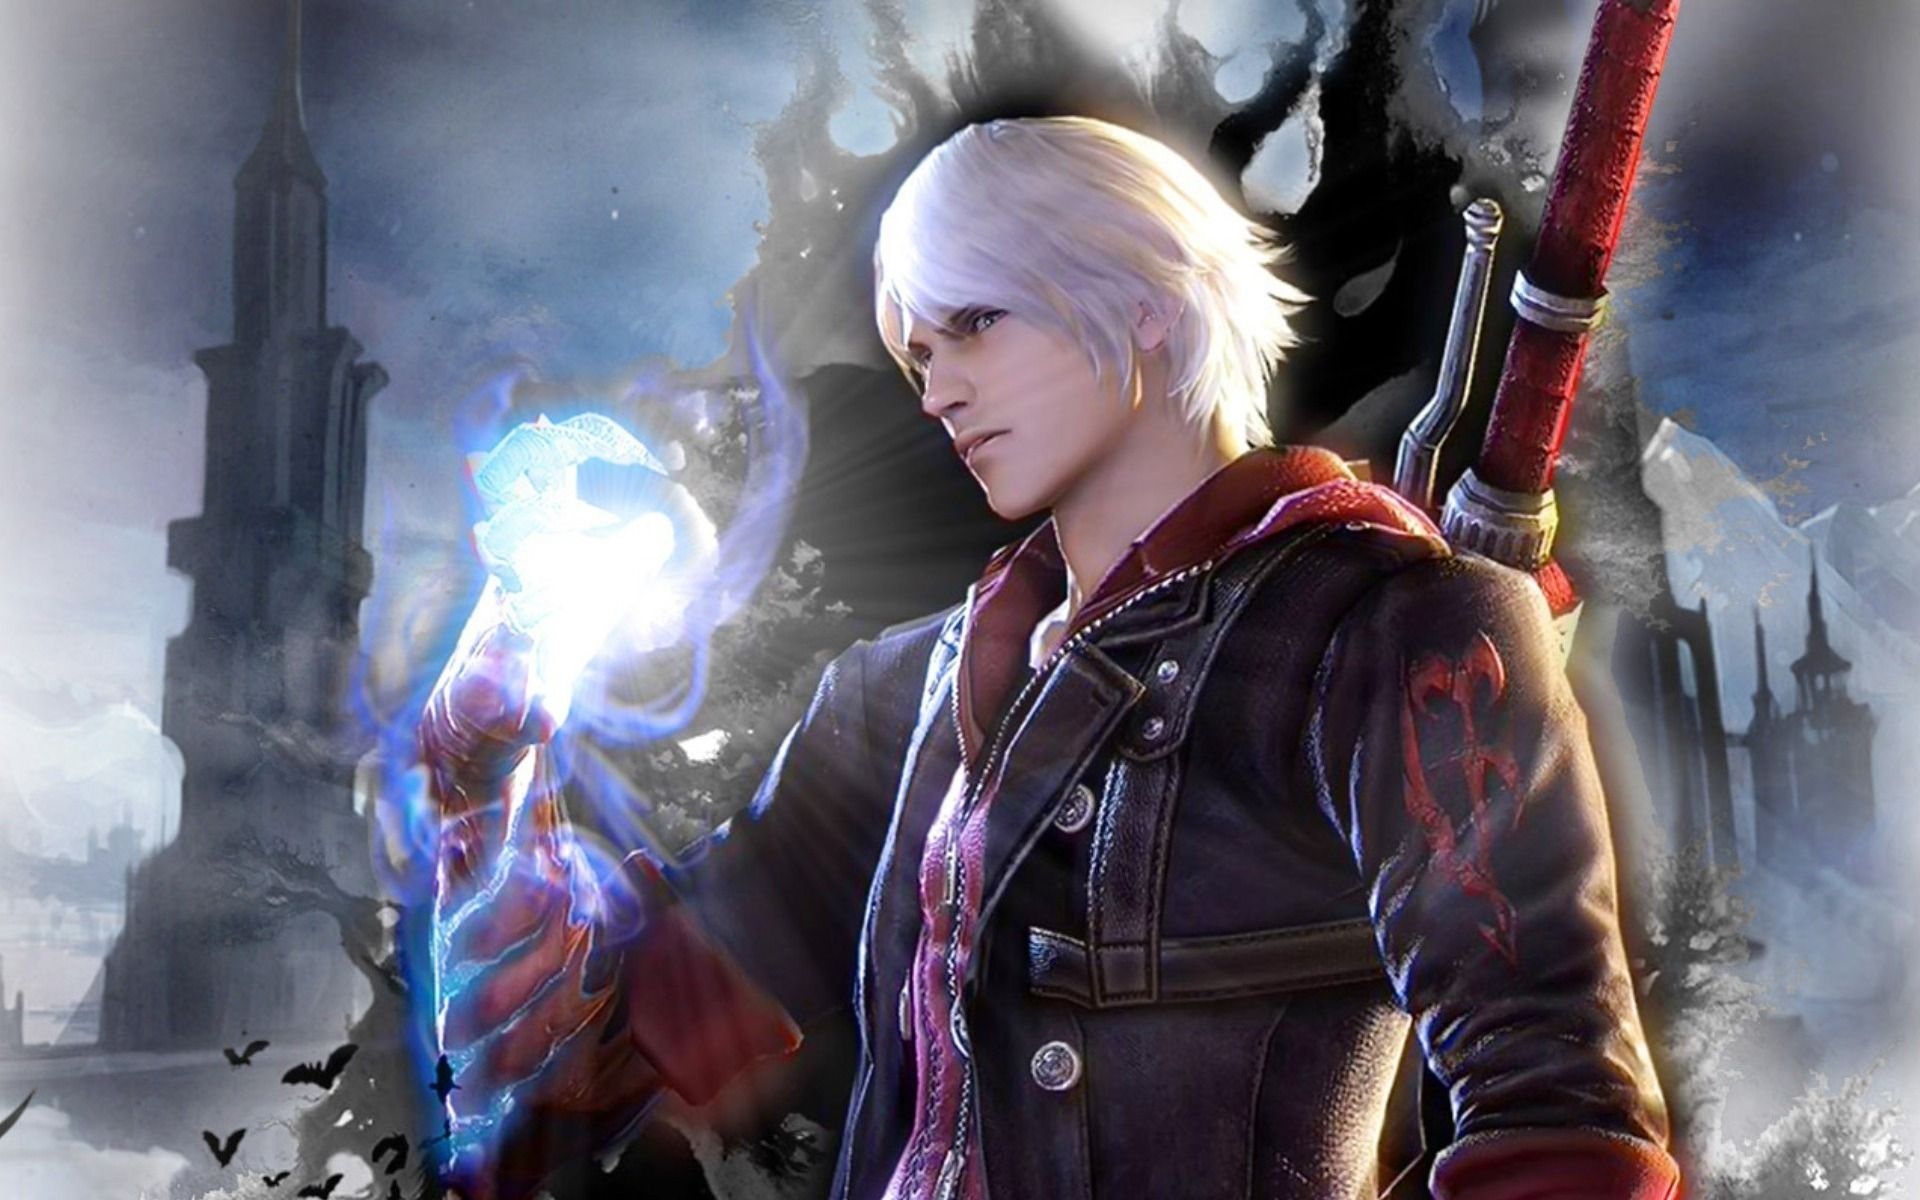 Wallpaper Dante Devil May Cry vdeo game